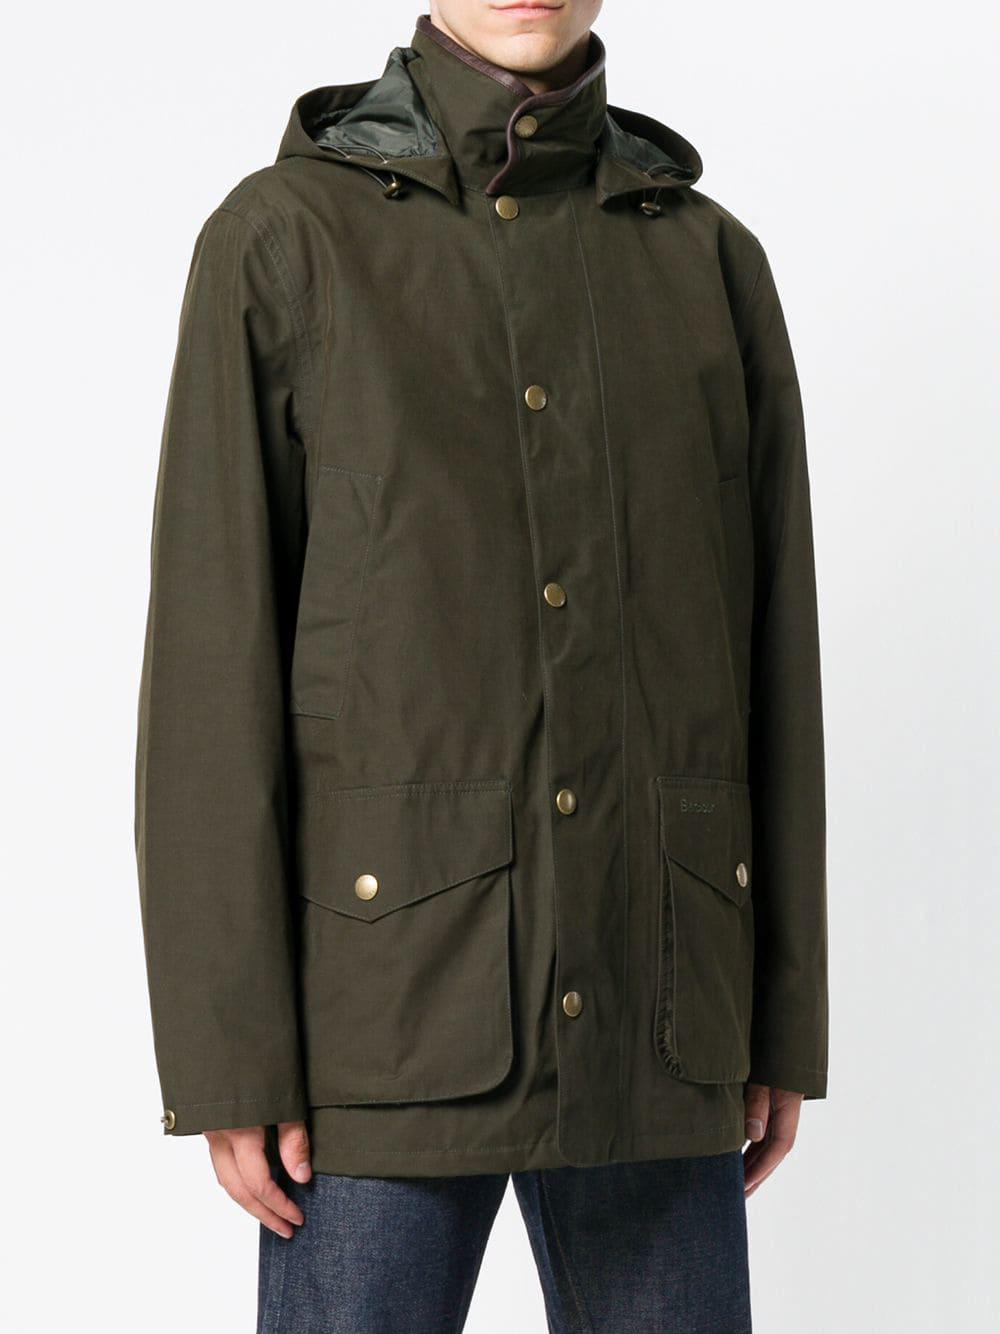 Barbour Cotton Mallaig Jacket in Green for Men - Lyst